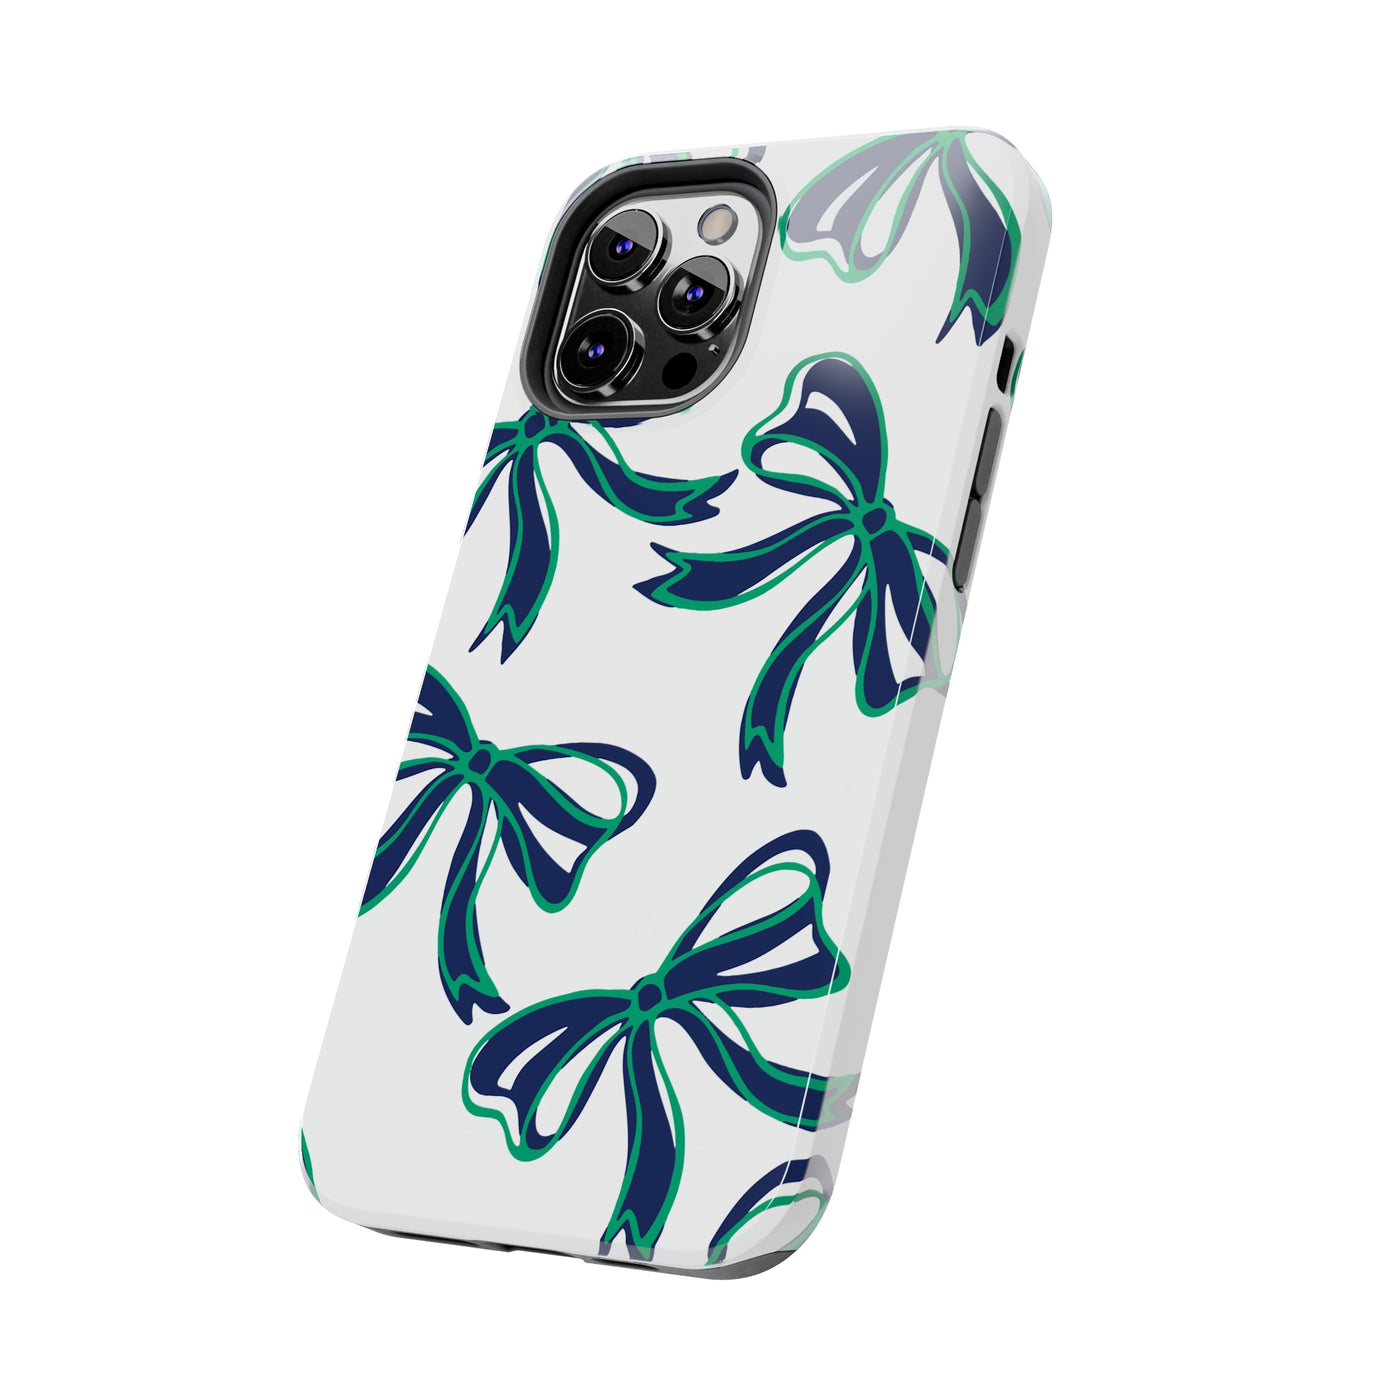 Trendy Bow Phone Case, Bed Party Bow Iphone case, Bow Phone Case, - Notre Dame, green and blue